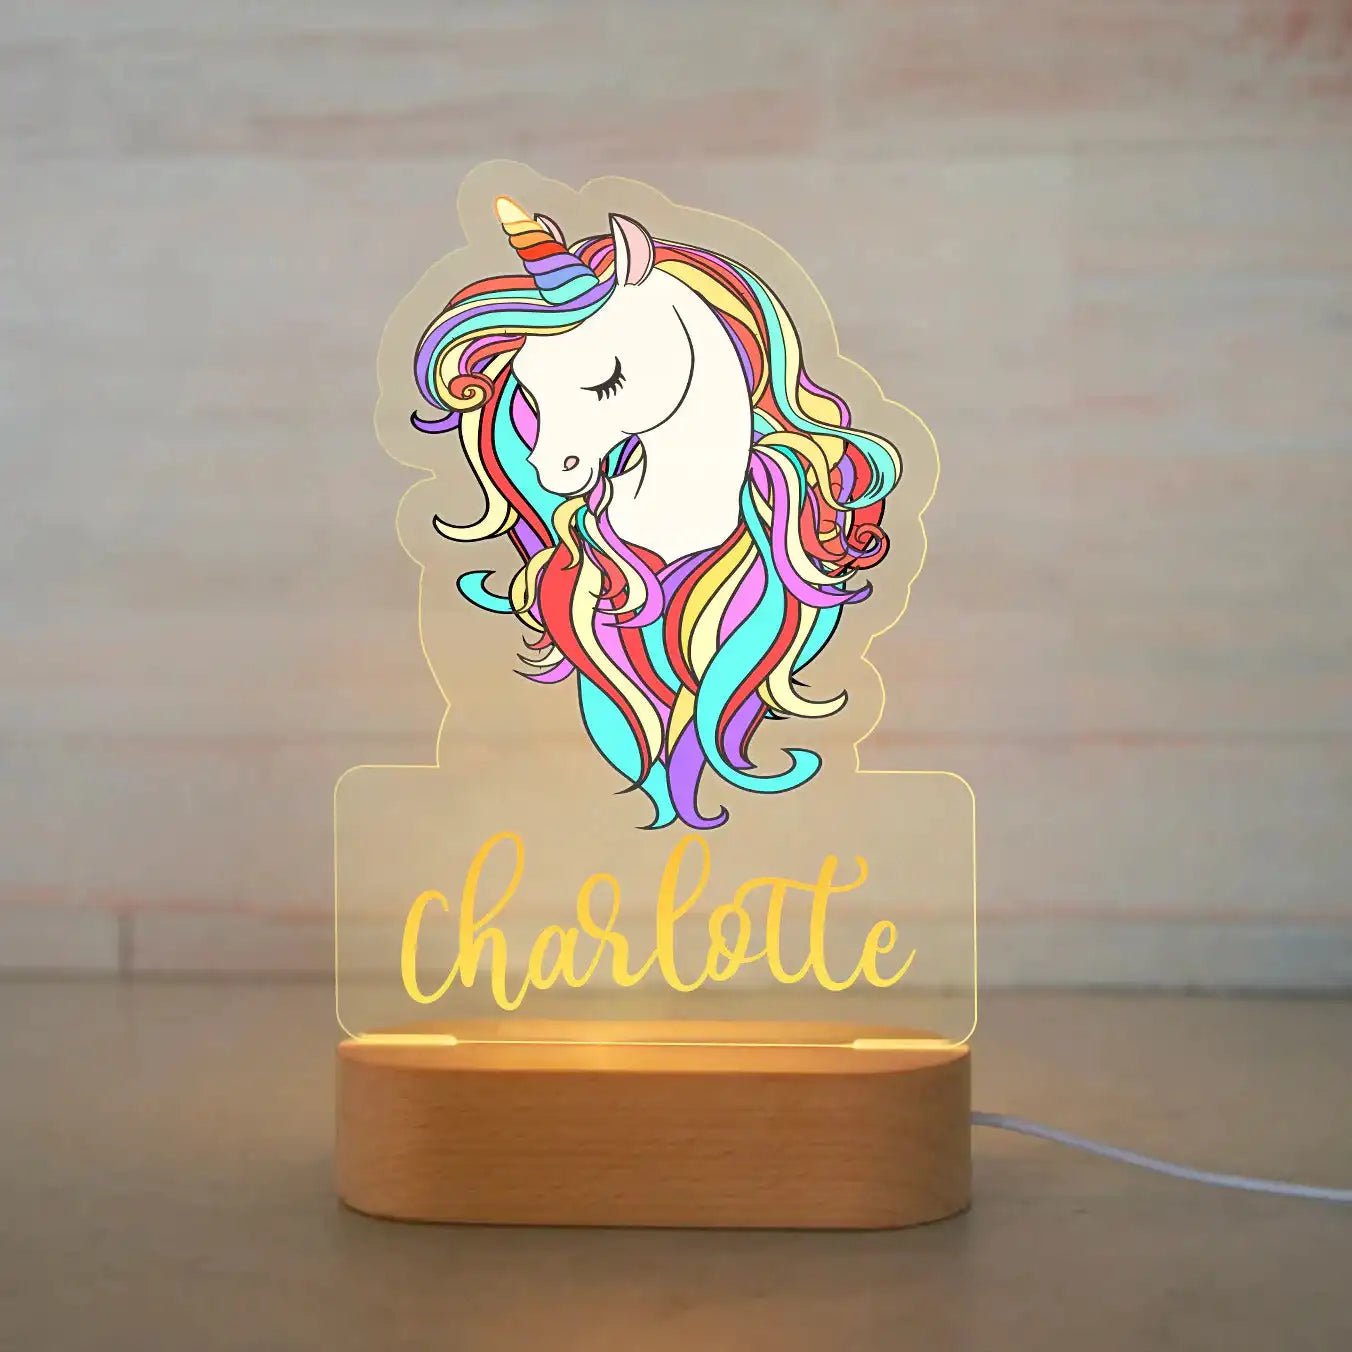 Customized Animal-themed Night Light for Kids - Personalized with Child's Name, Acrylic Lamp for Bedroom Decor Warm Light / 12Unicorn